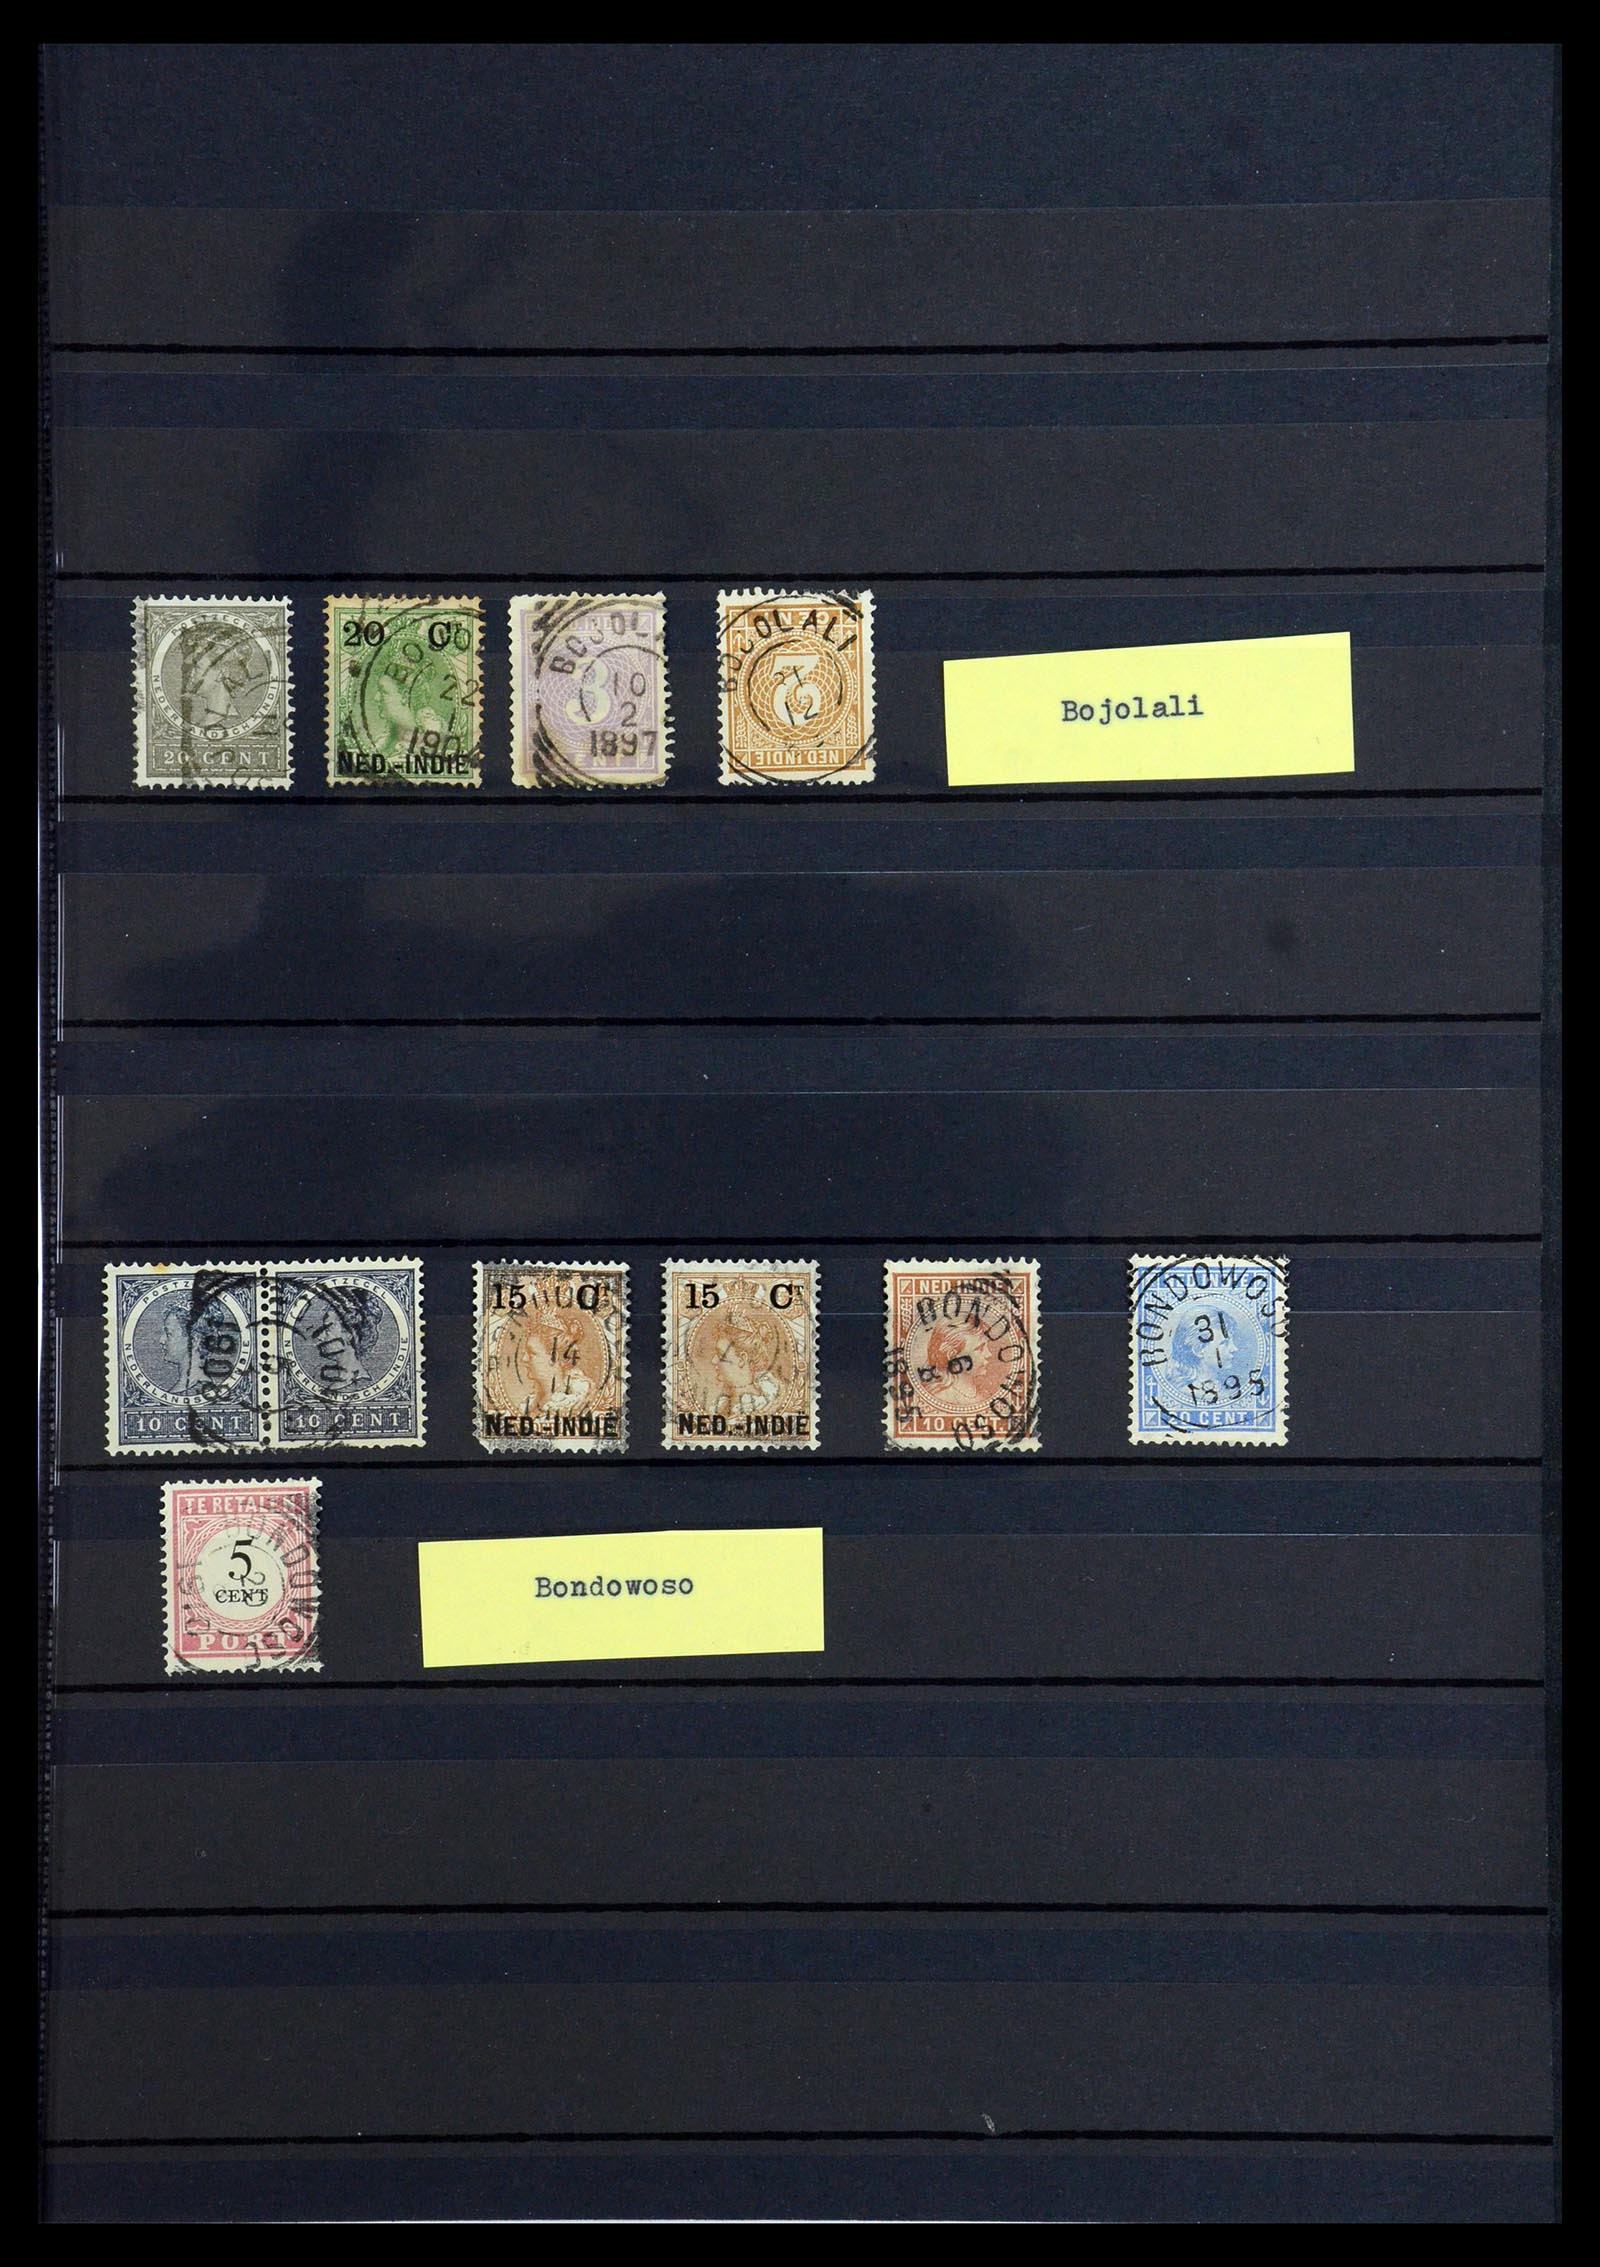 36371 011 - Stamp collection 36371 Dutch east Indies cancels.